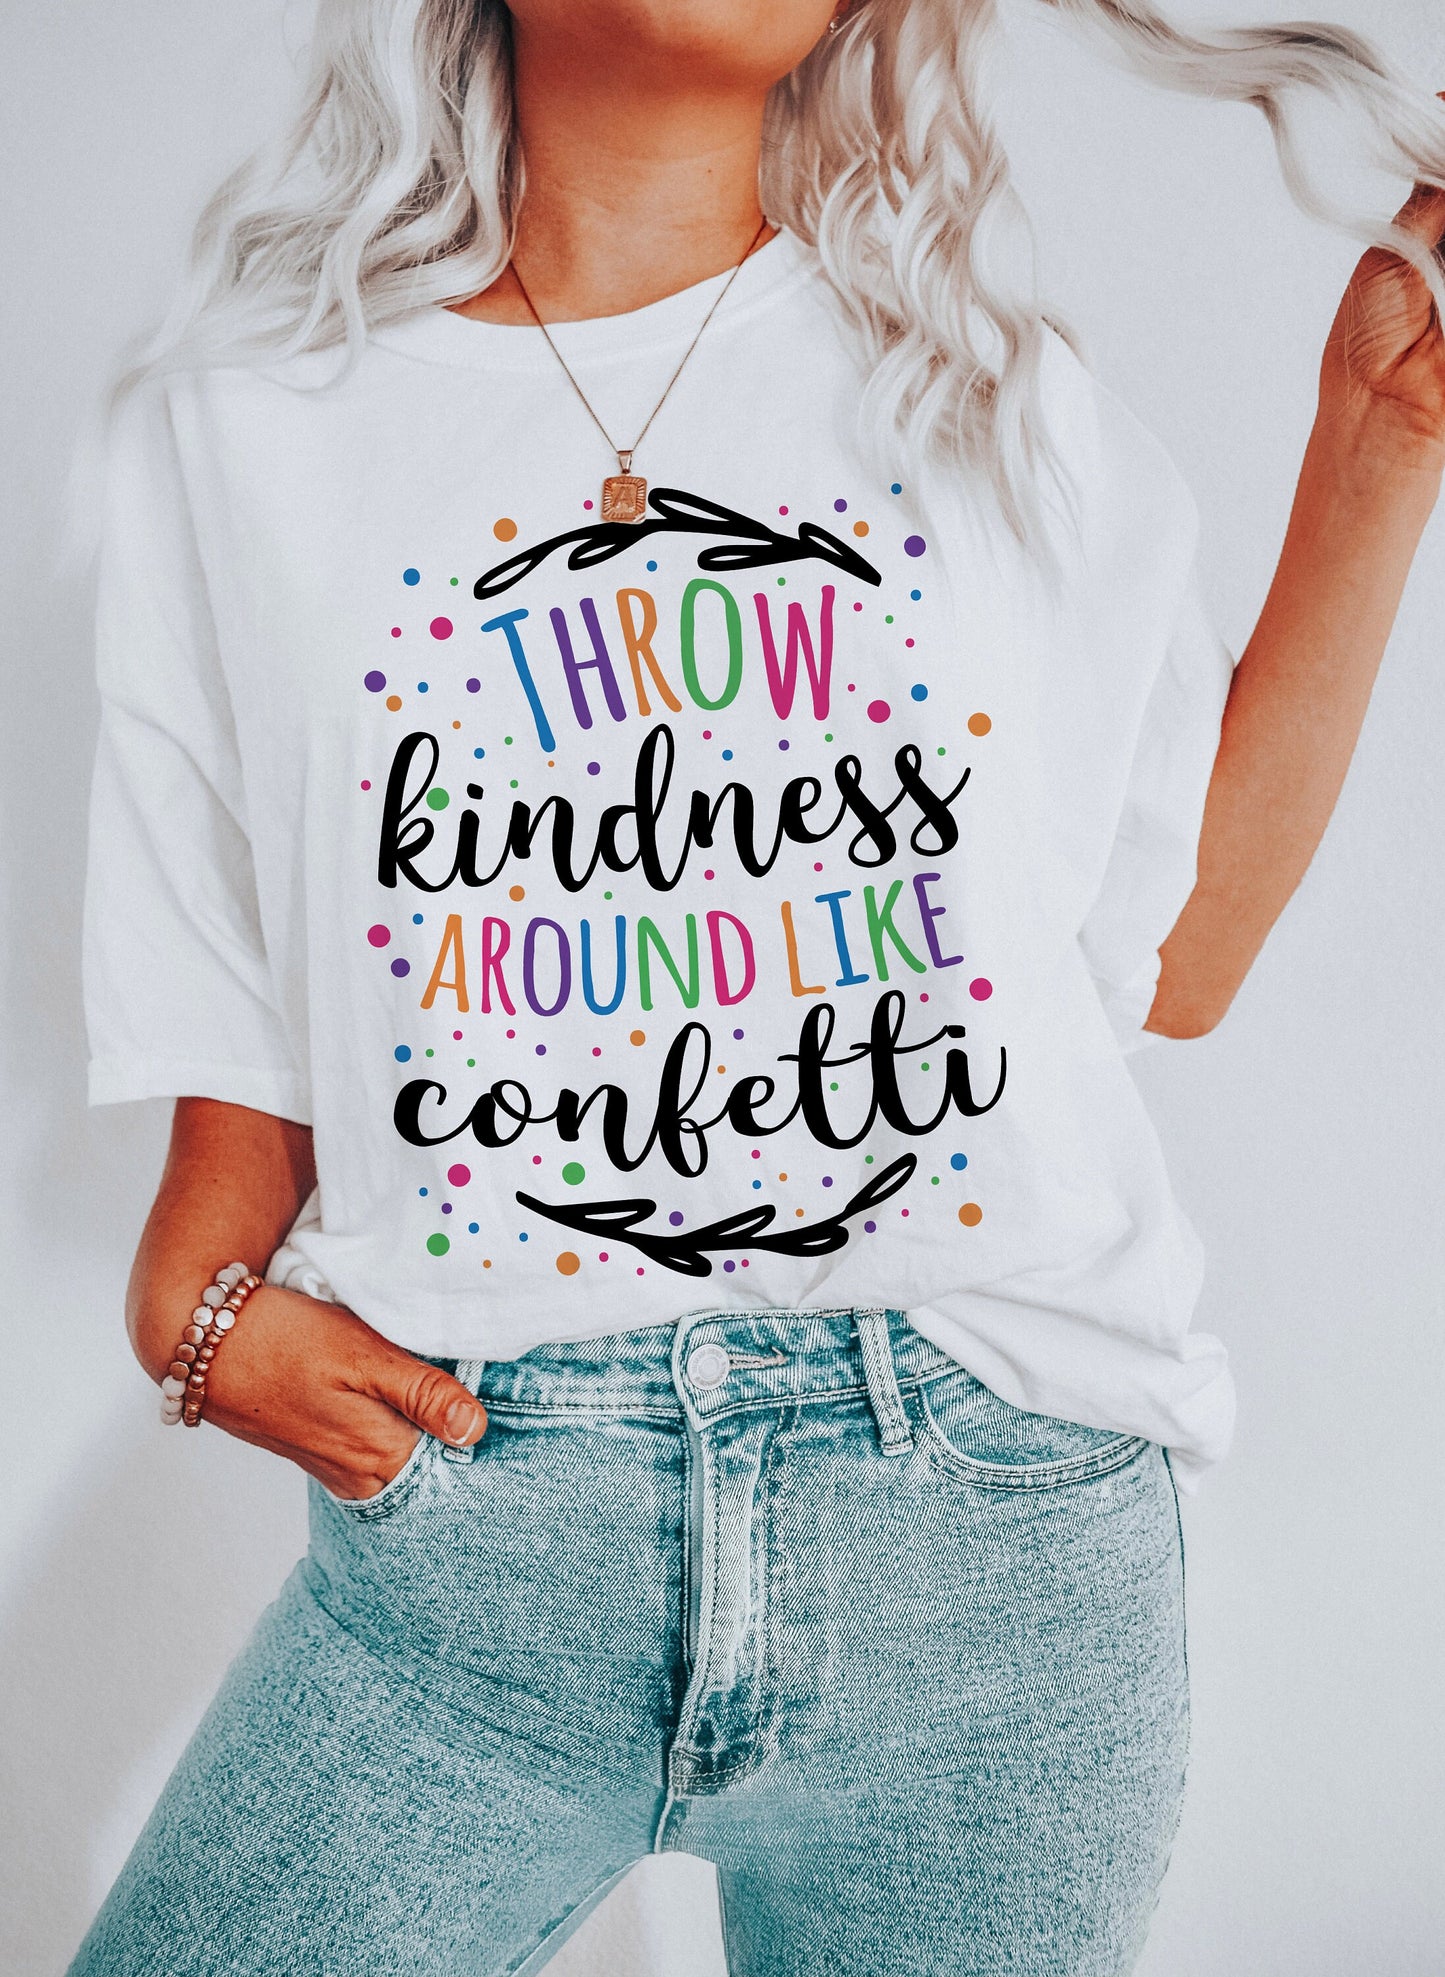 Throw Kindness Around Like Confetti Uplifting Ultra Soft Graphic Tee Unisex Soft Tee T-shirt for Women or Men